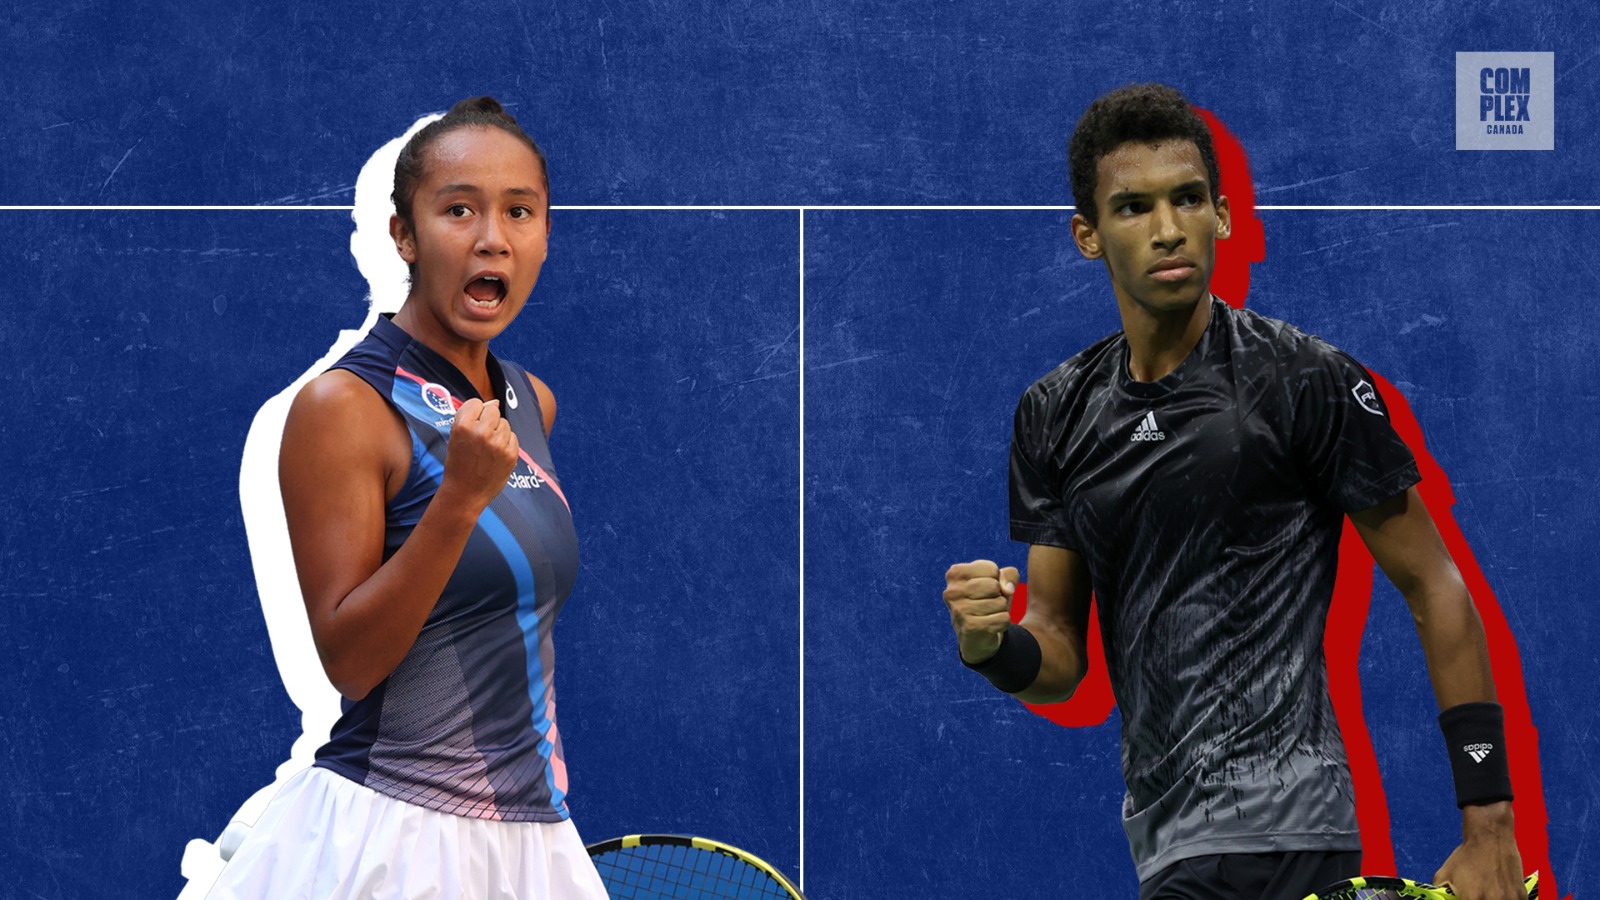 ‘It’s Great for Canada’: Leylah Fernandez and Felix Auger Aliassime Make History at the U.S. Open